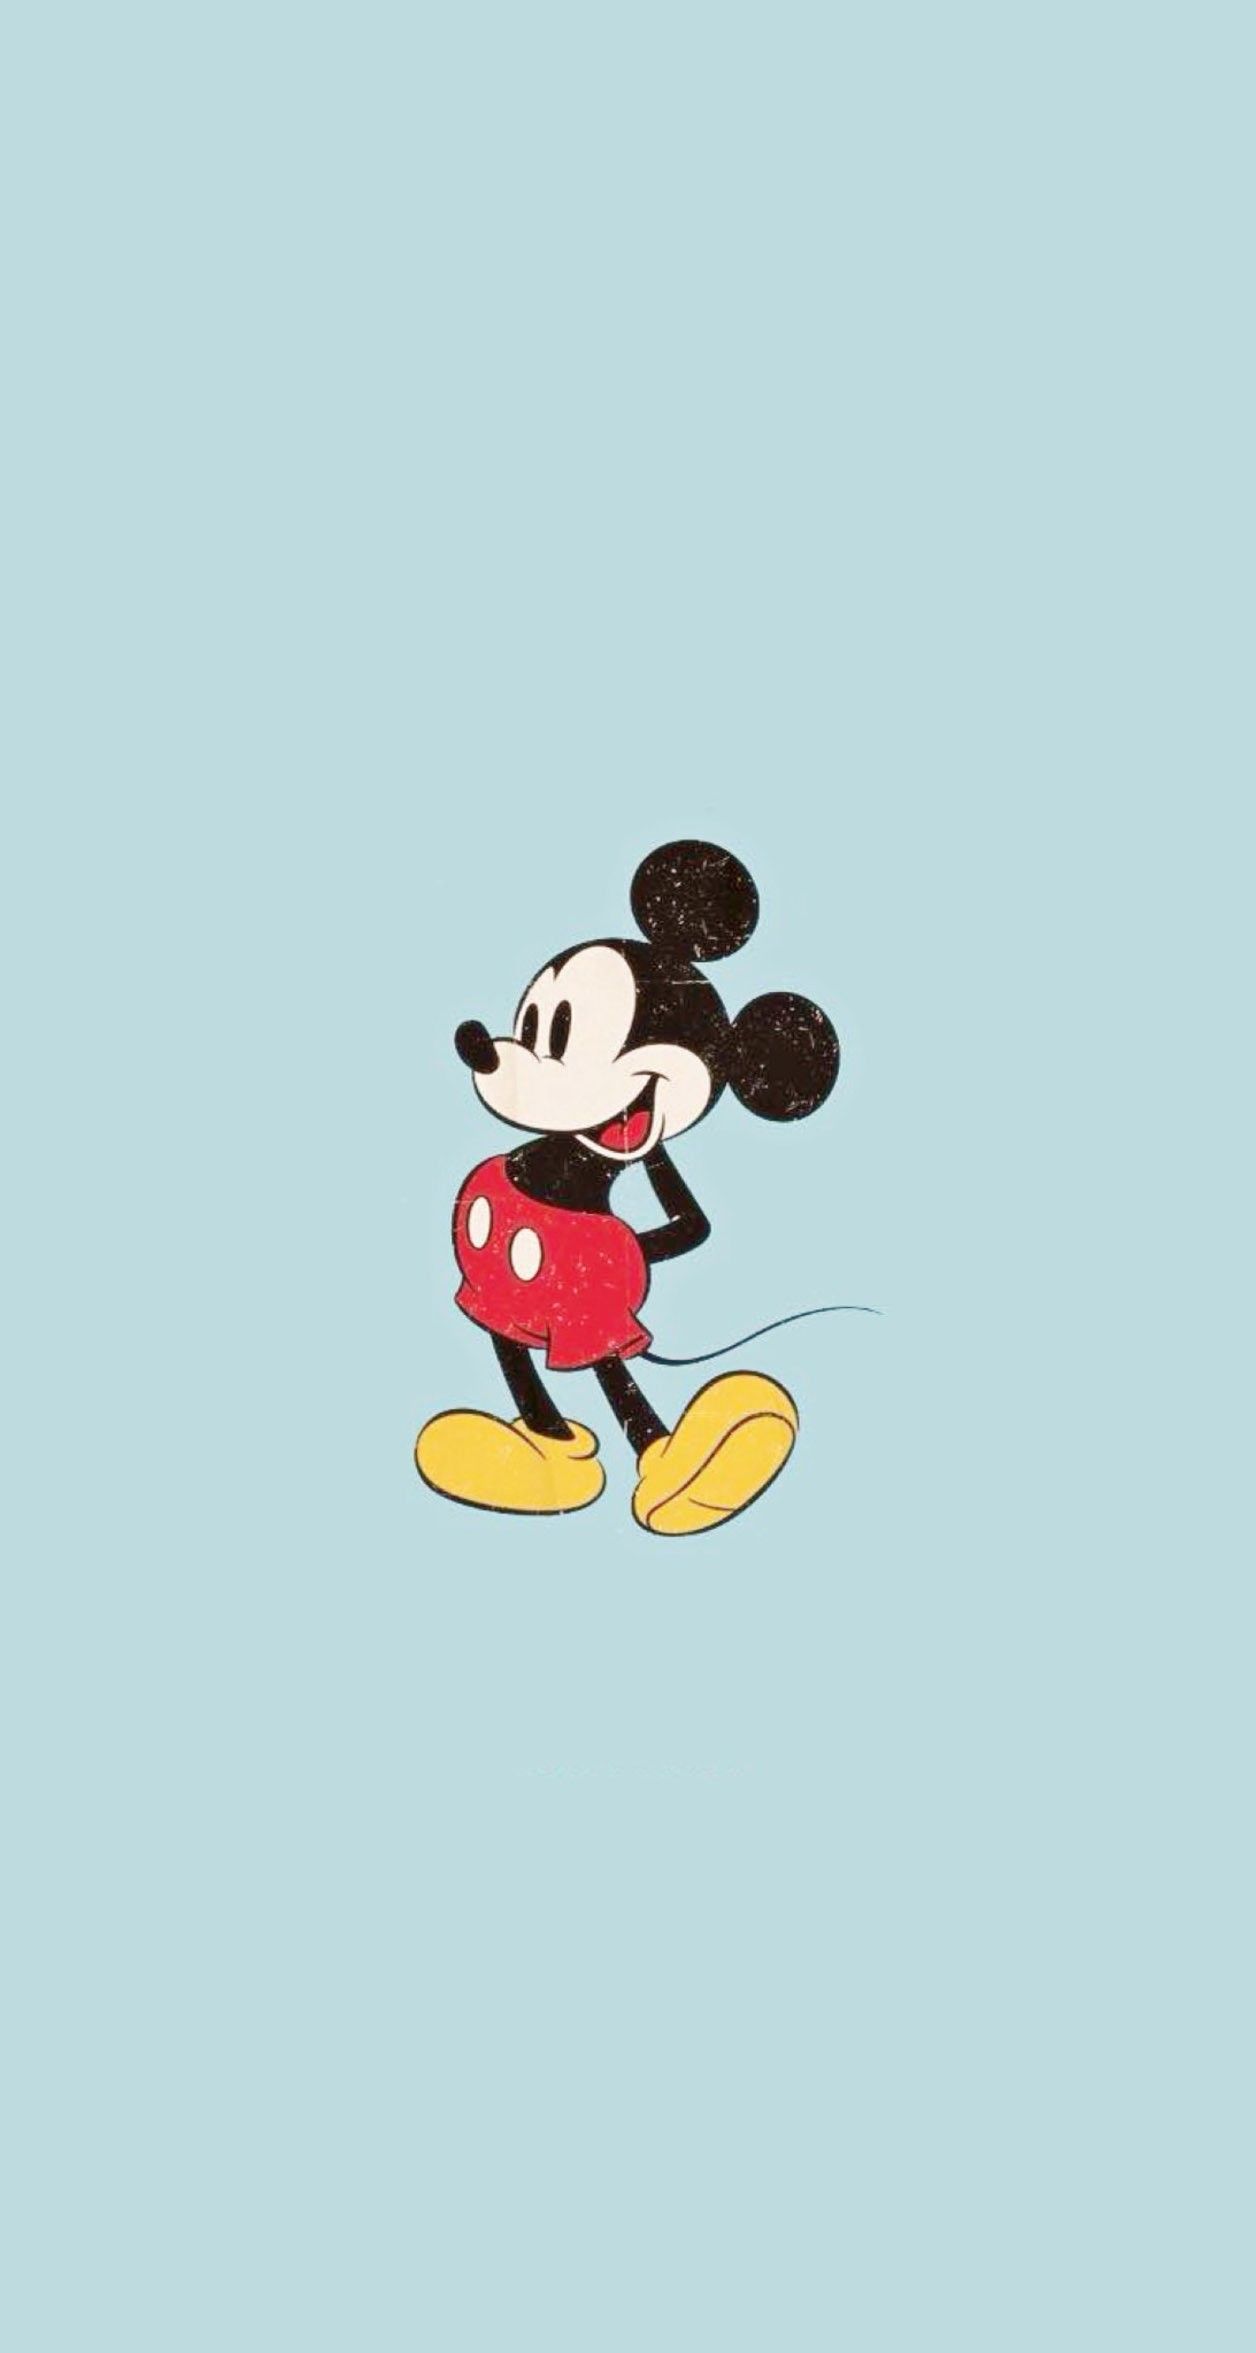 Blue Mickey Mouse Wallpaper Free Blue Mickey Mouse